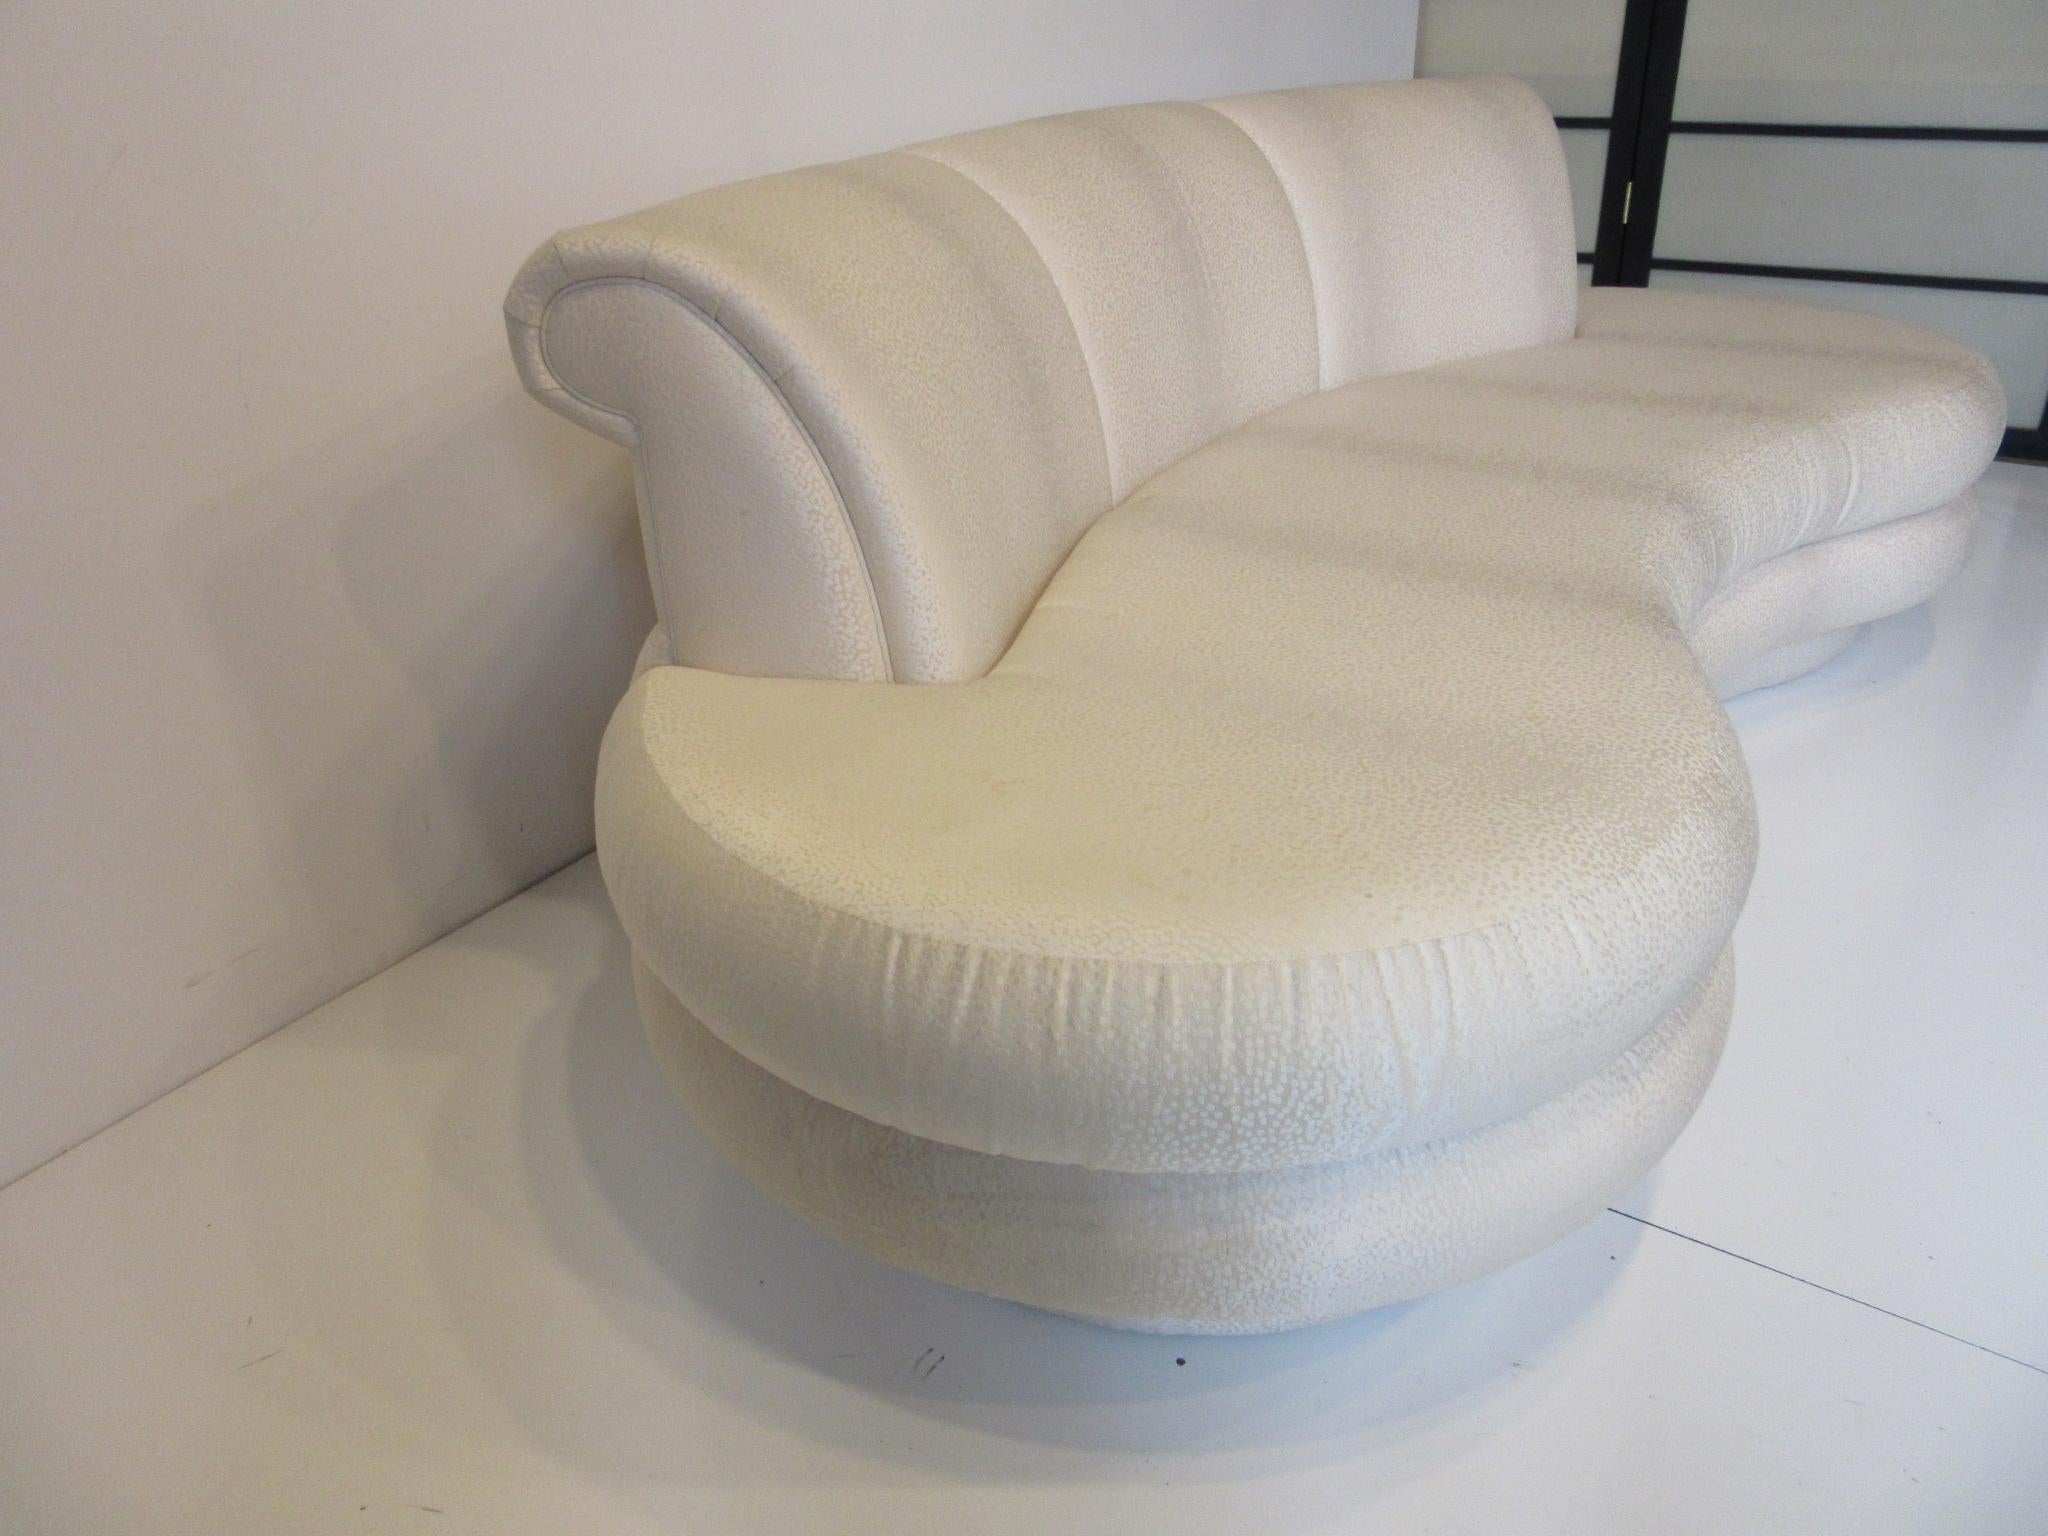 A very stylized Cloud shaped sofa with sculptural layered look in a very retro kidney shape with great back rolls manufactured by the Comfort Designs Furniture company founded in the 1970s by John Graham and well known designer Adrian Pearsall after